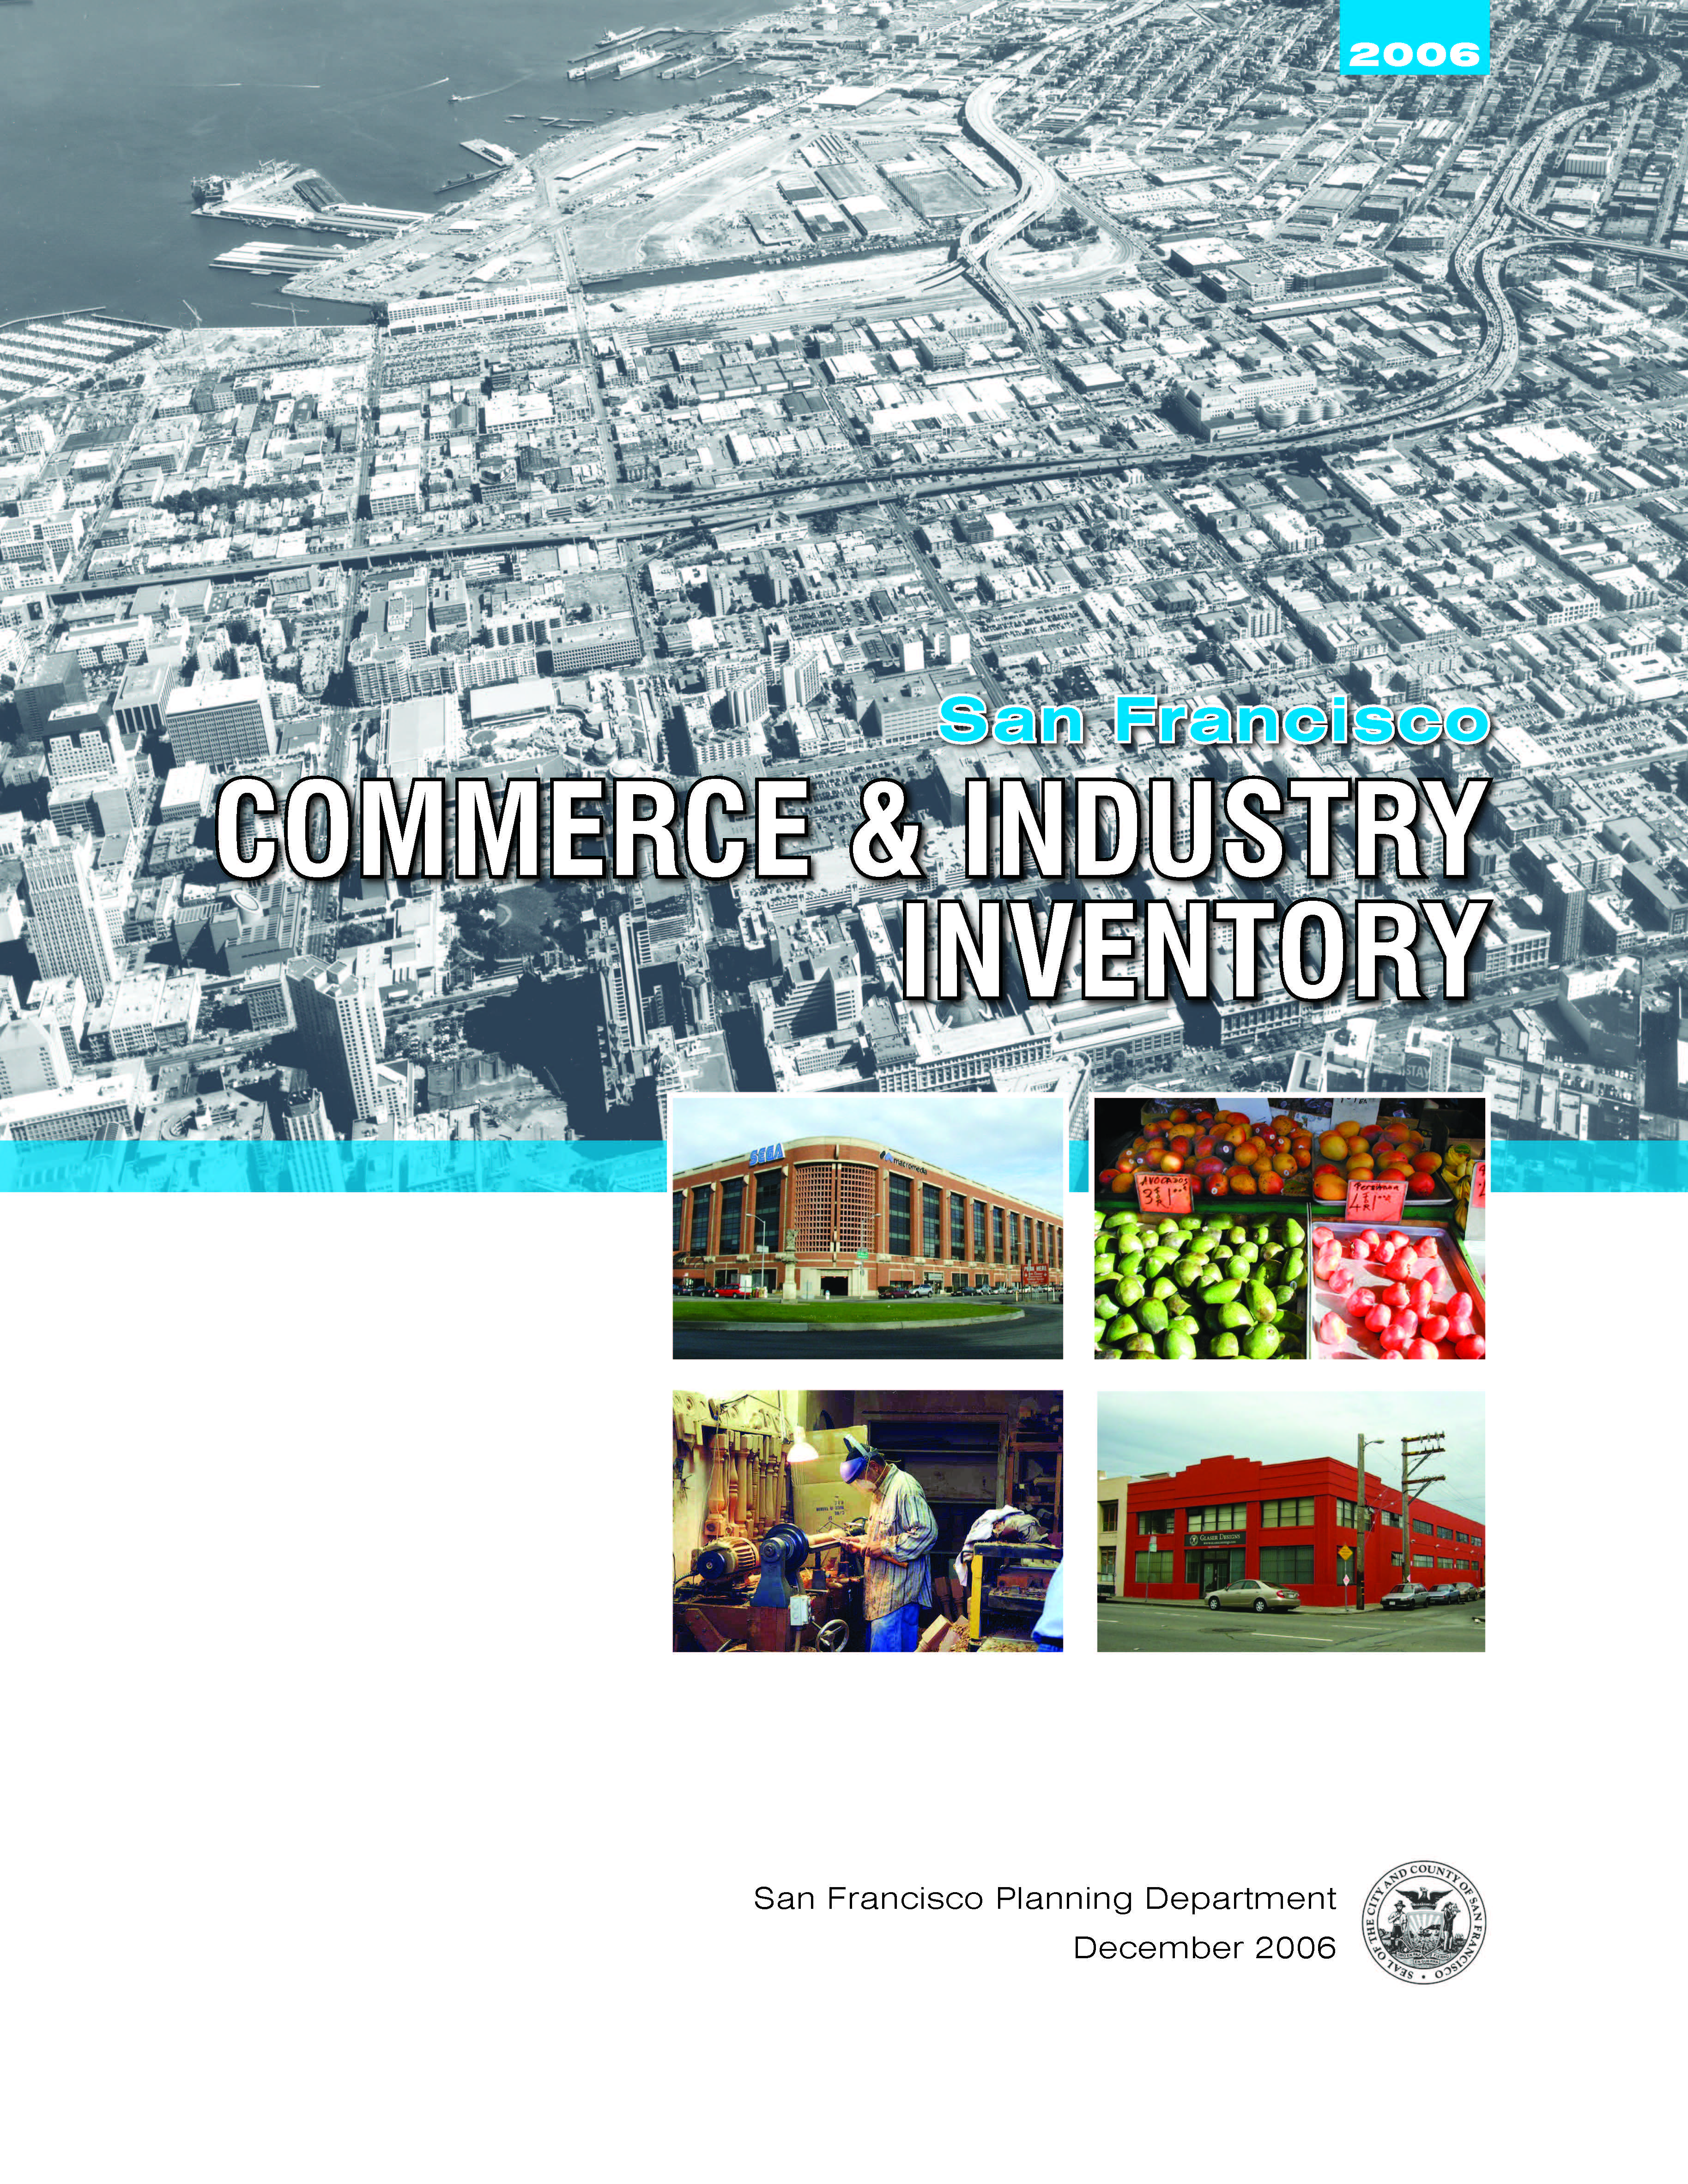 Cover Image for the Commerce & Industry Inventory Report 2006